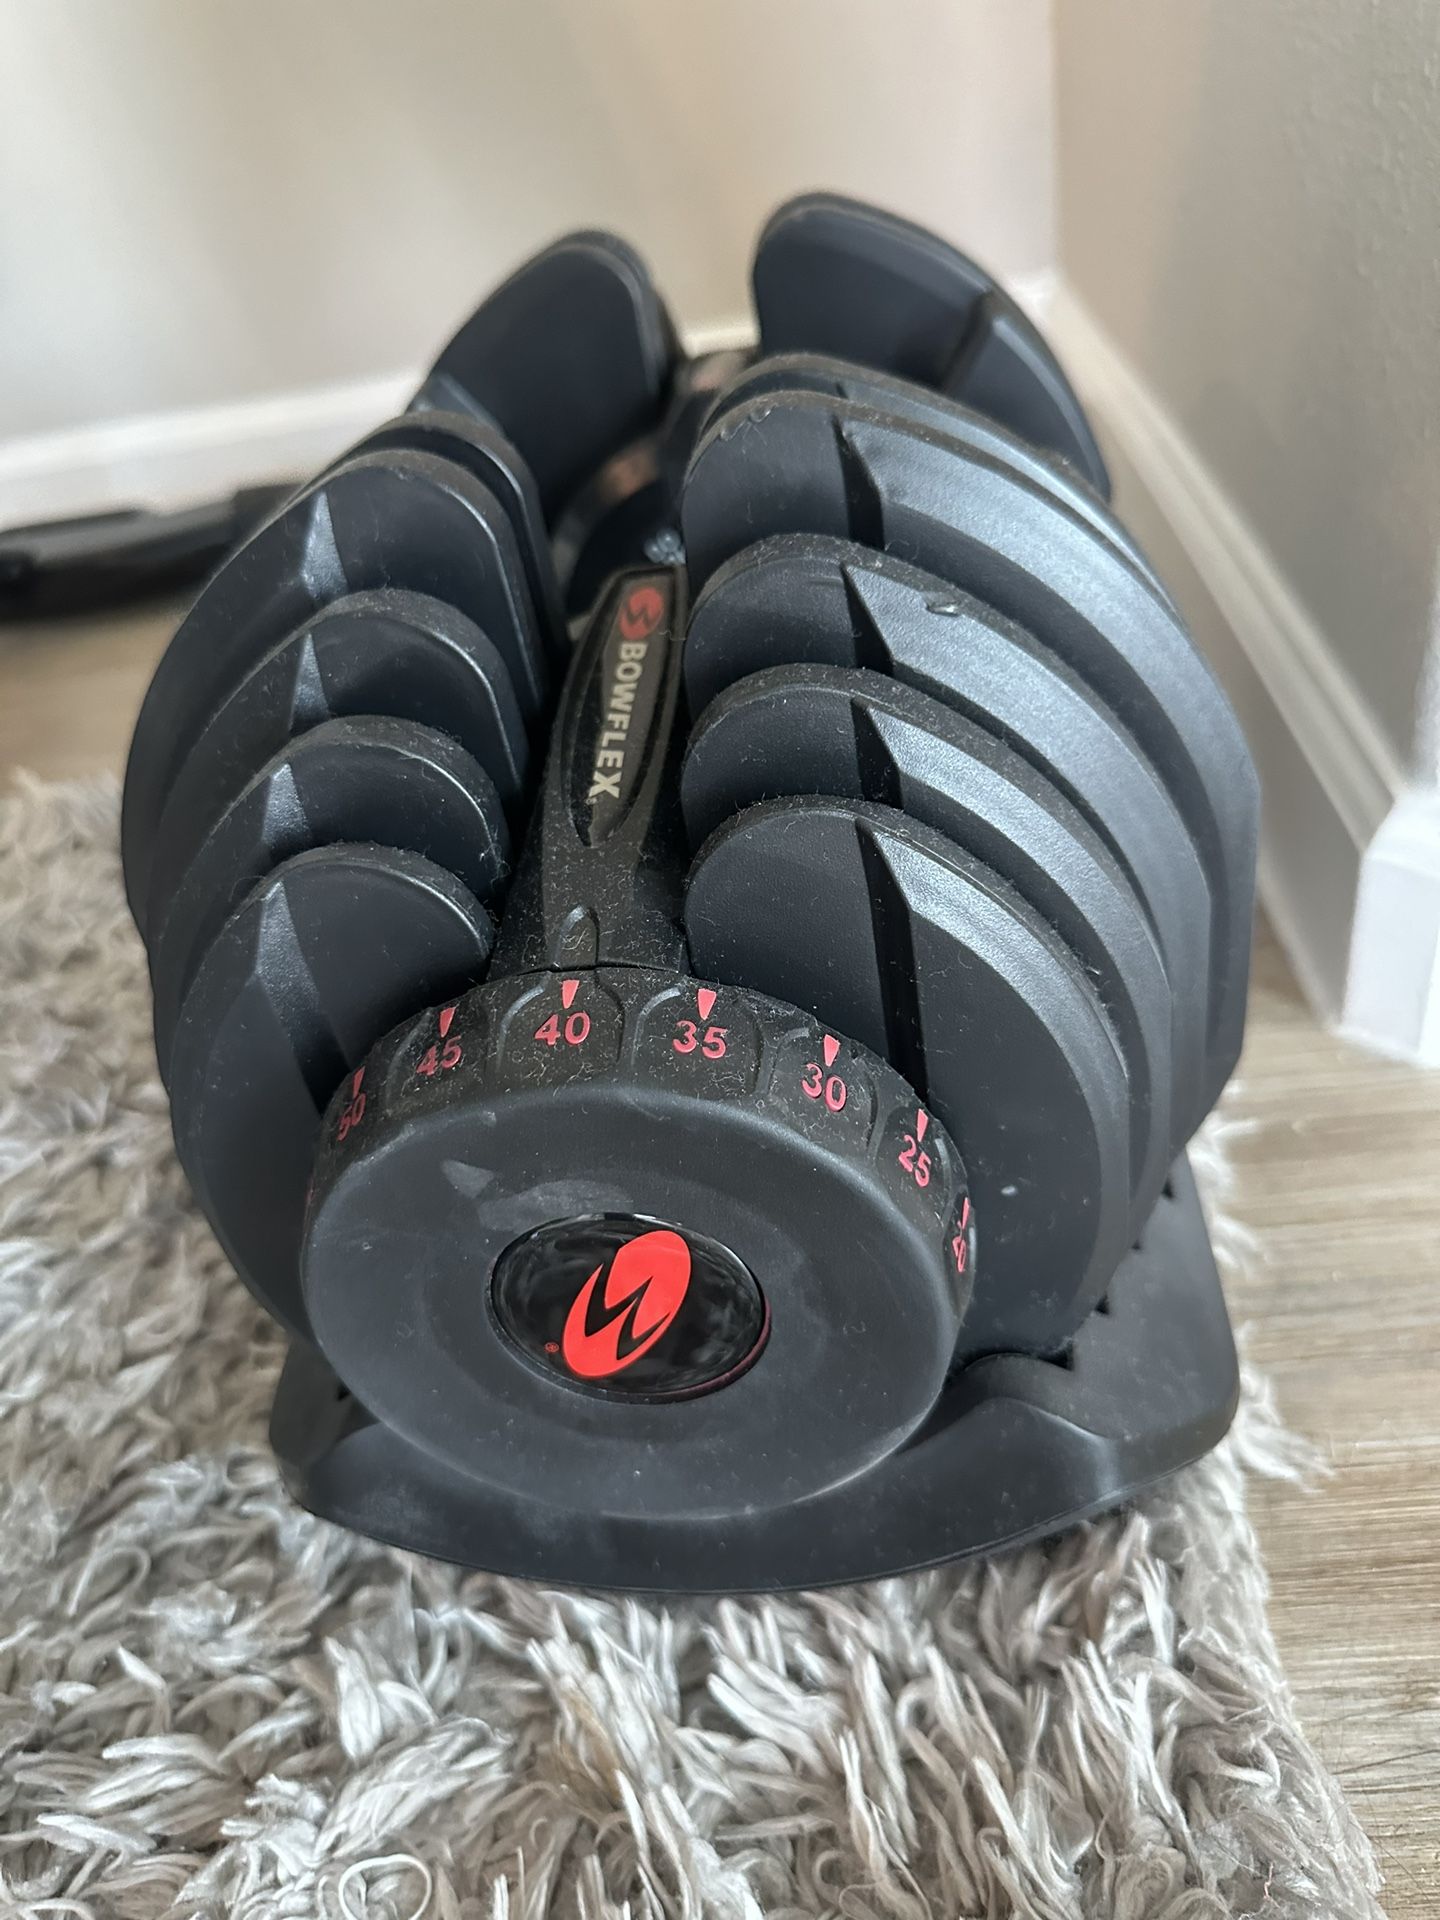 Bowflex Set Of Dumbells With Bench 